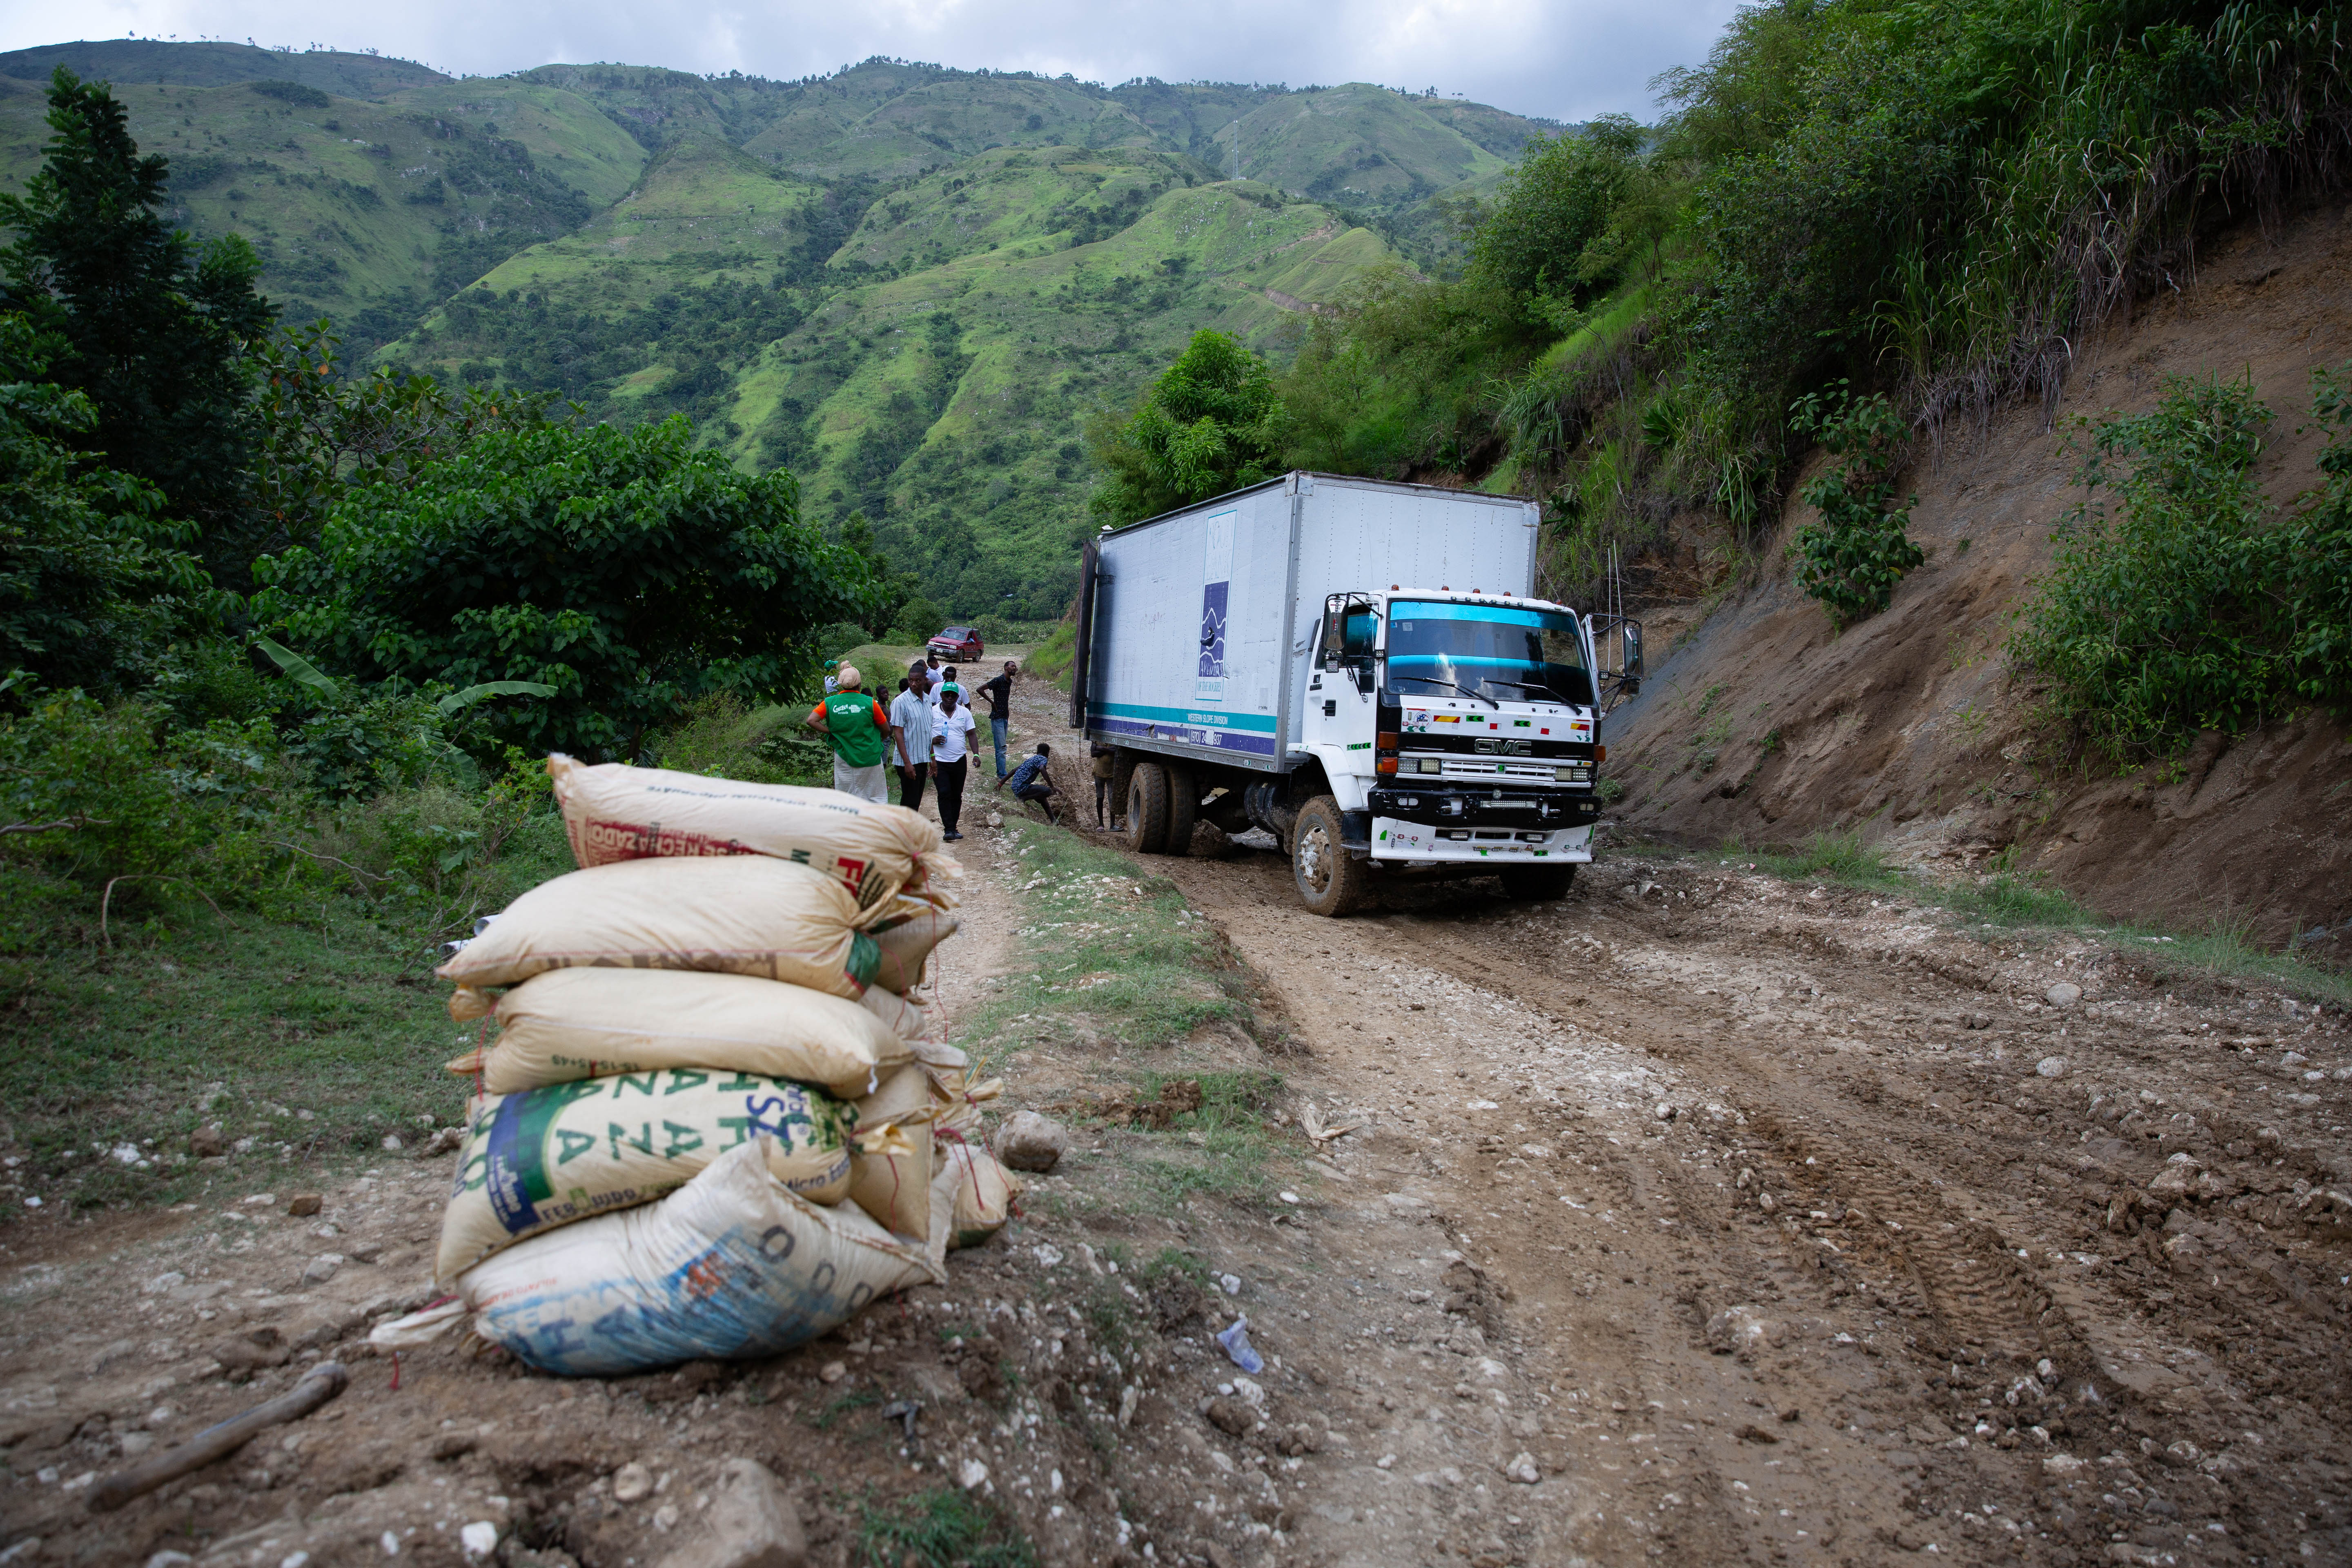 Sacks of supplies piled on the side of a dirt road, with a white truck stopped next to them.